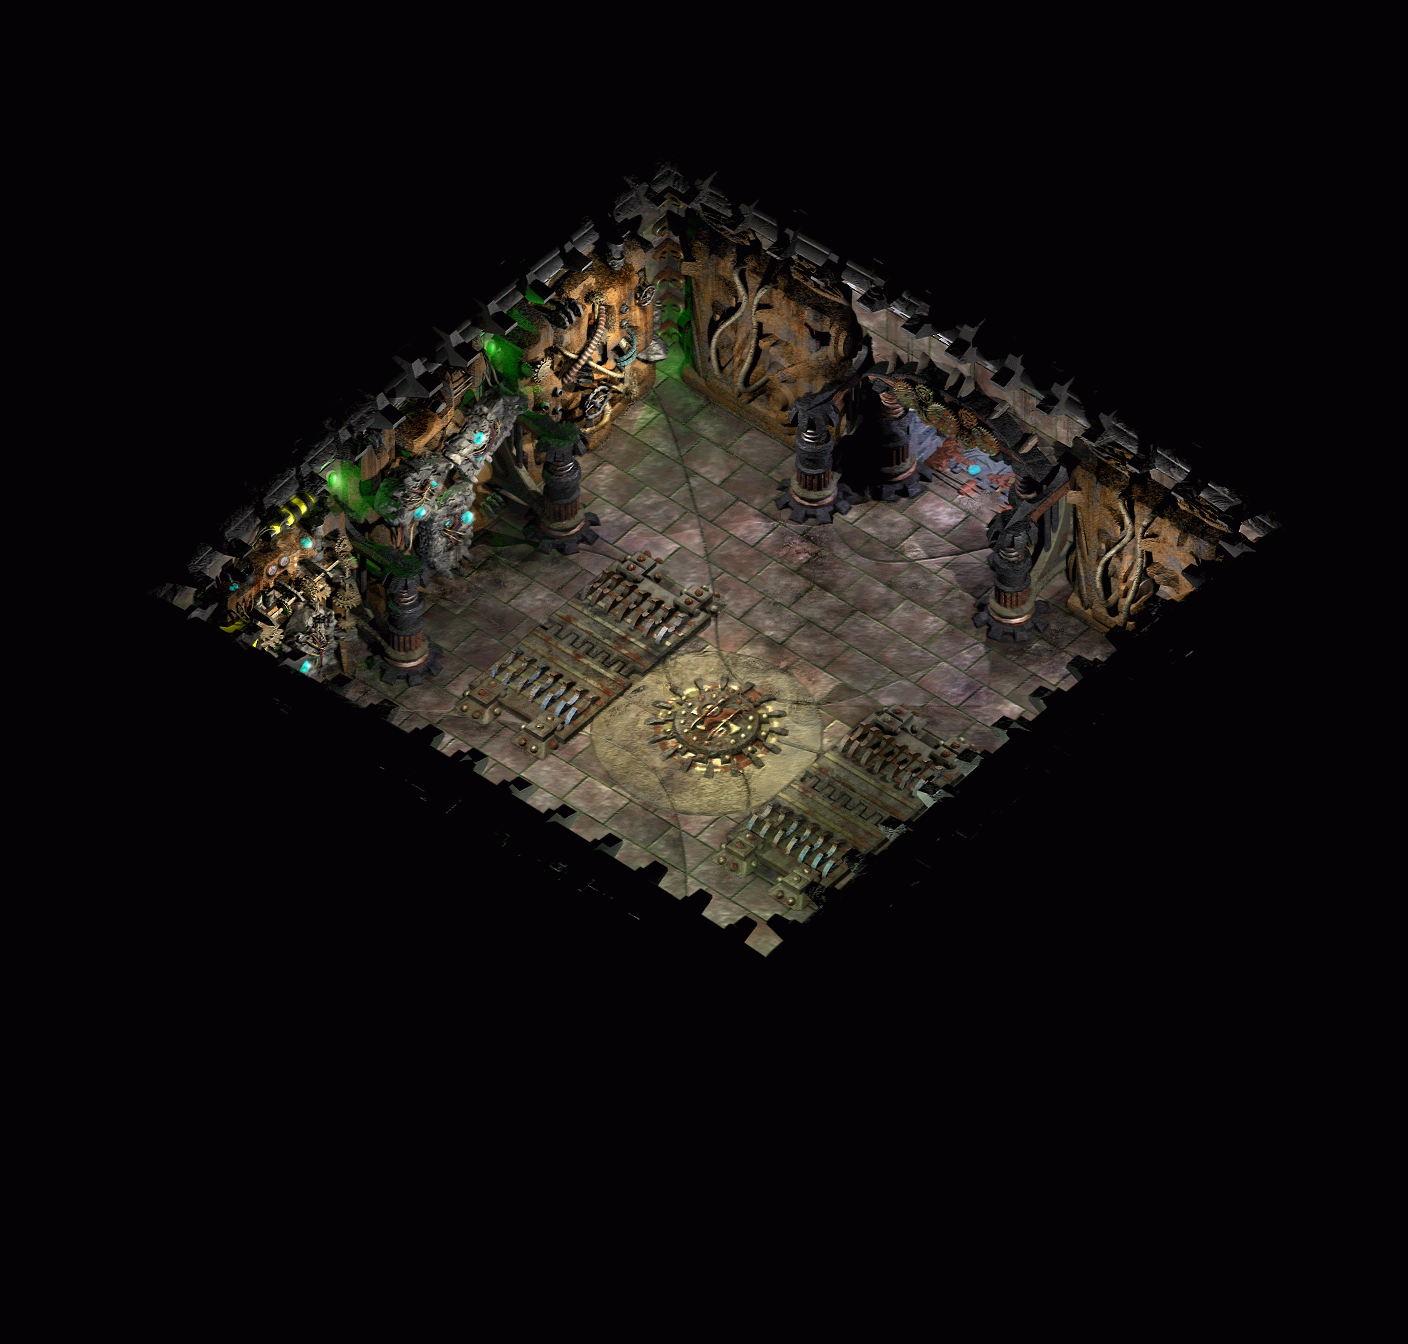 Planescape: Torment - Engineering Room